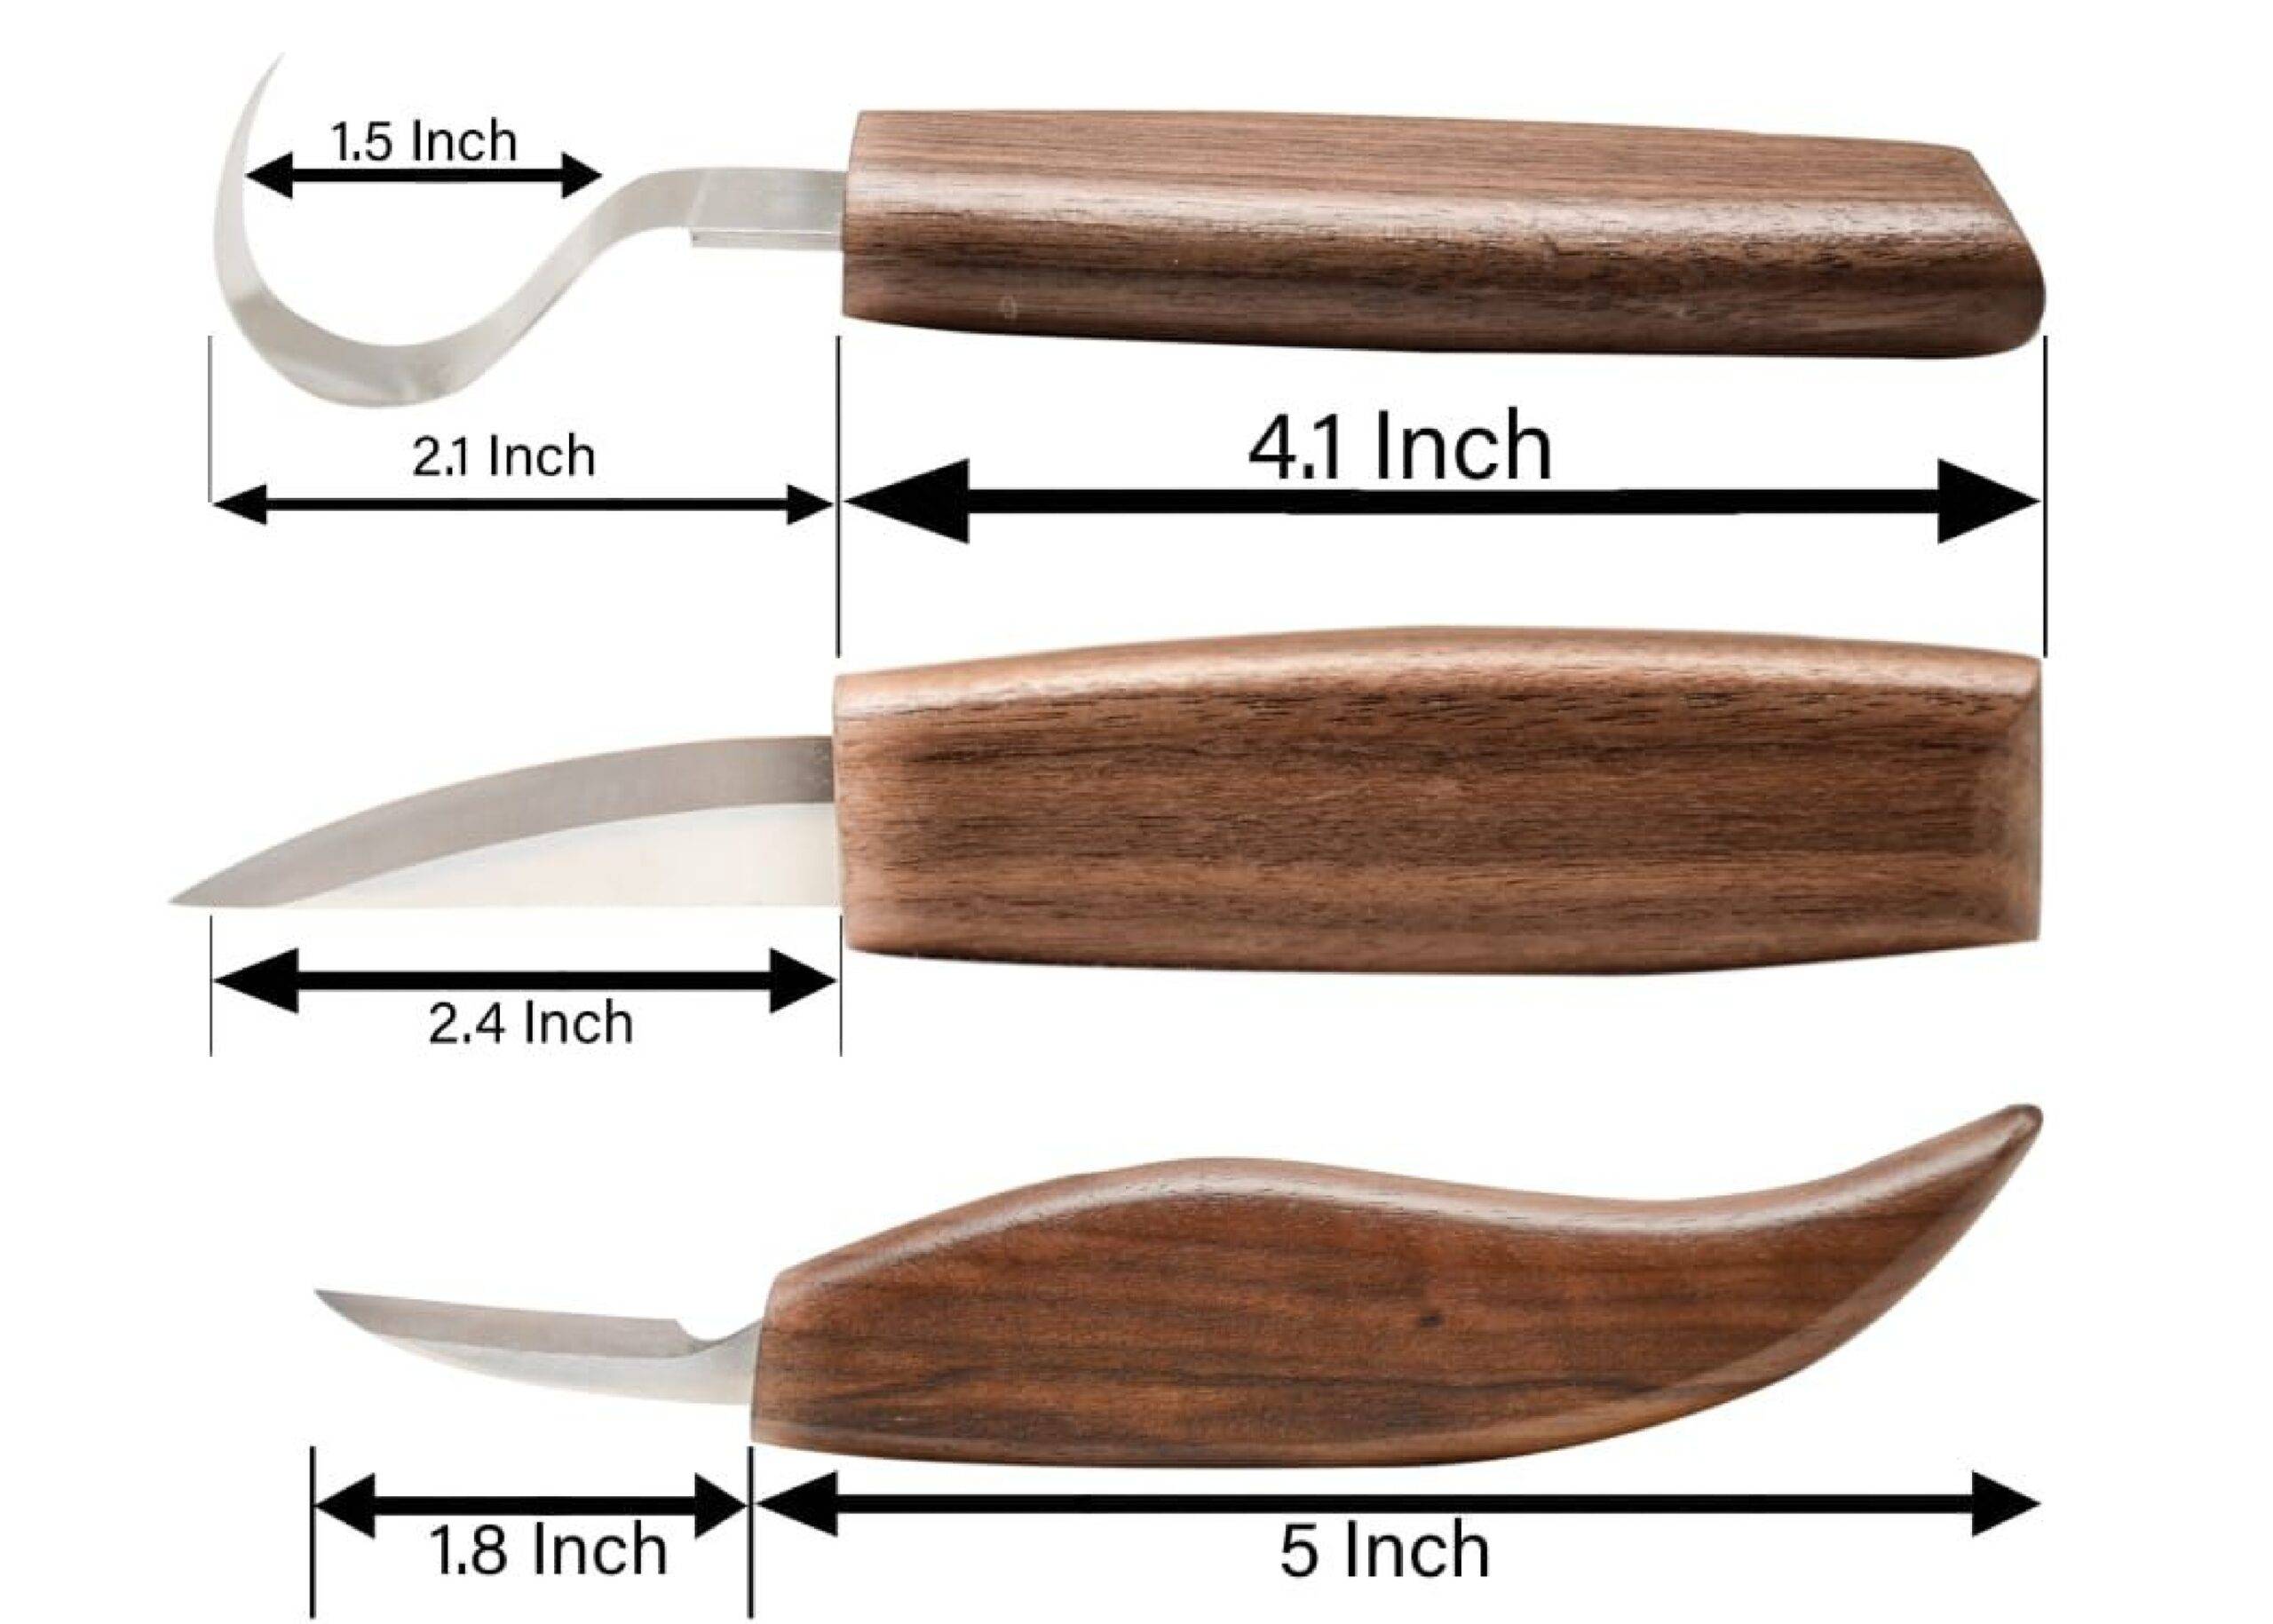 Wood Carving Tools 6 in 1 Knife Set Trending Product